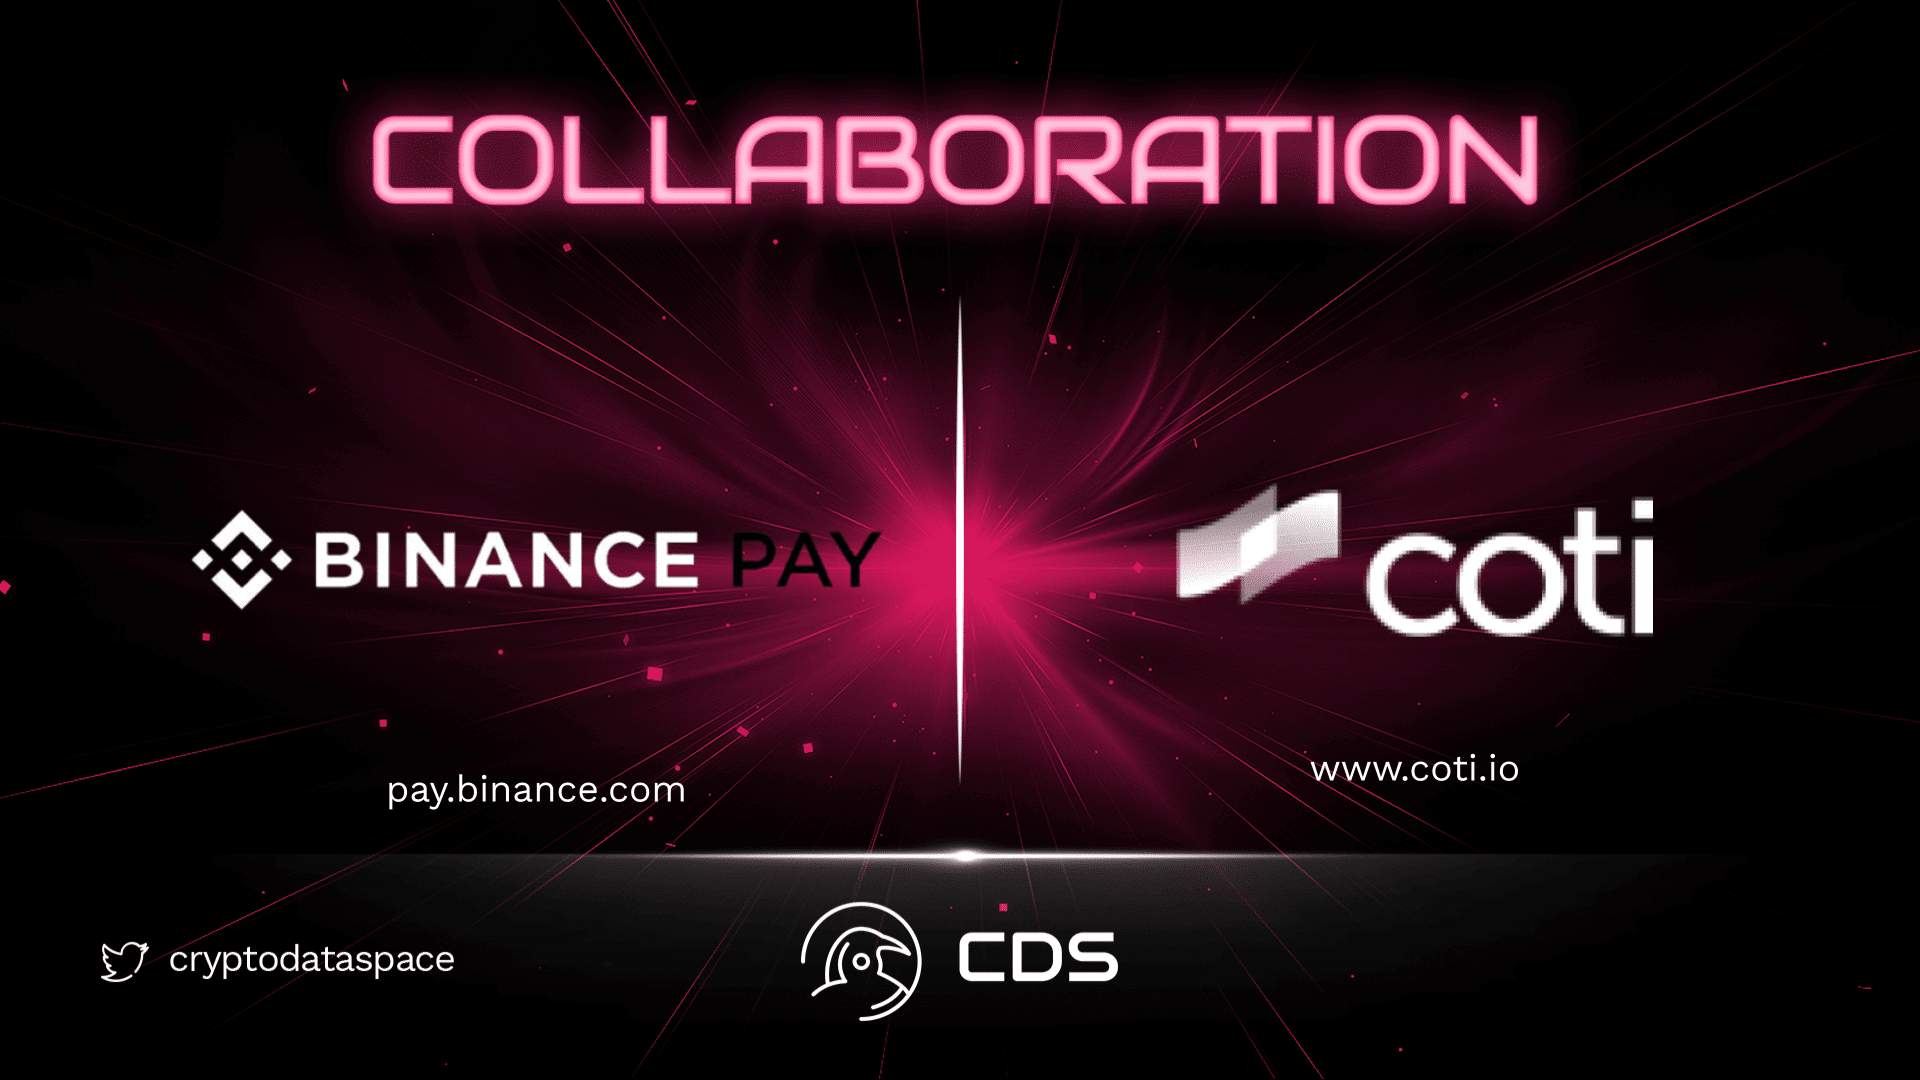 Binance pay and coti collaboration